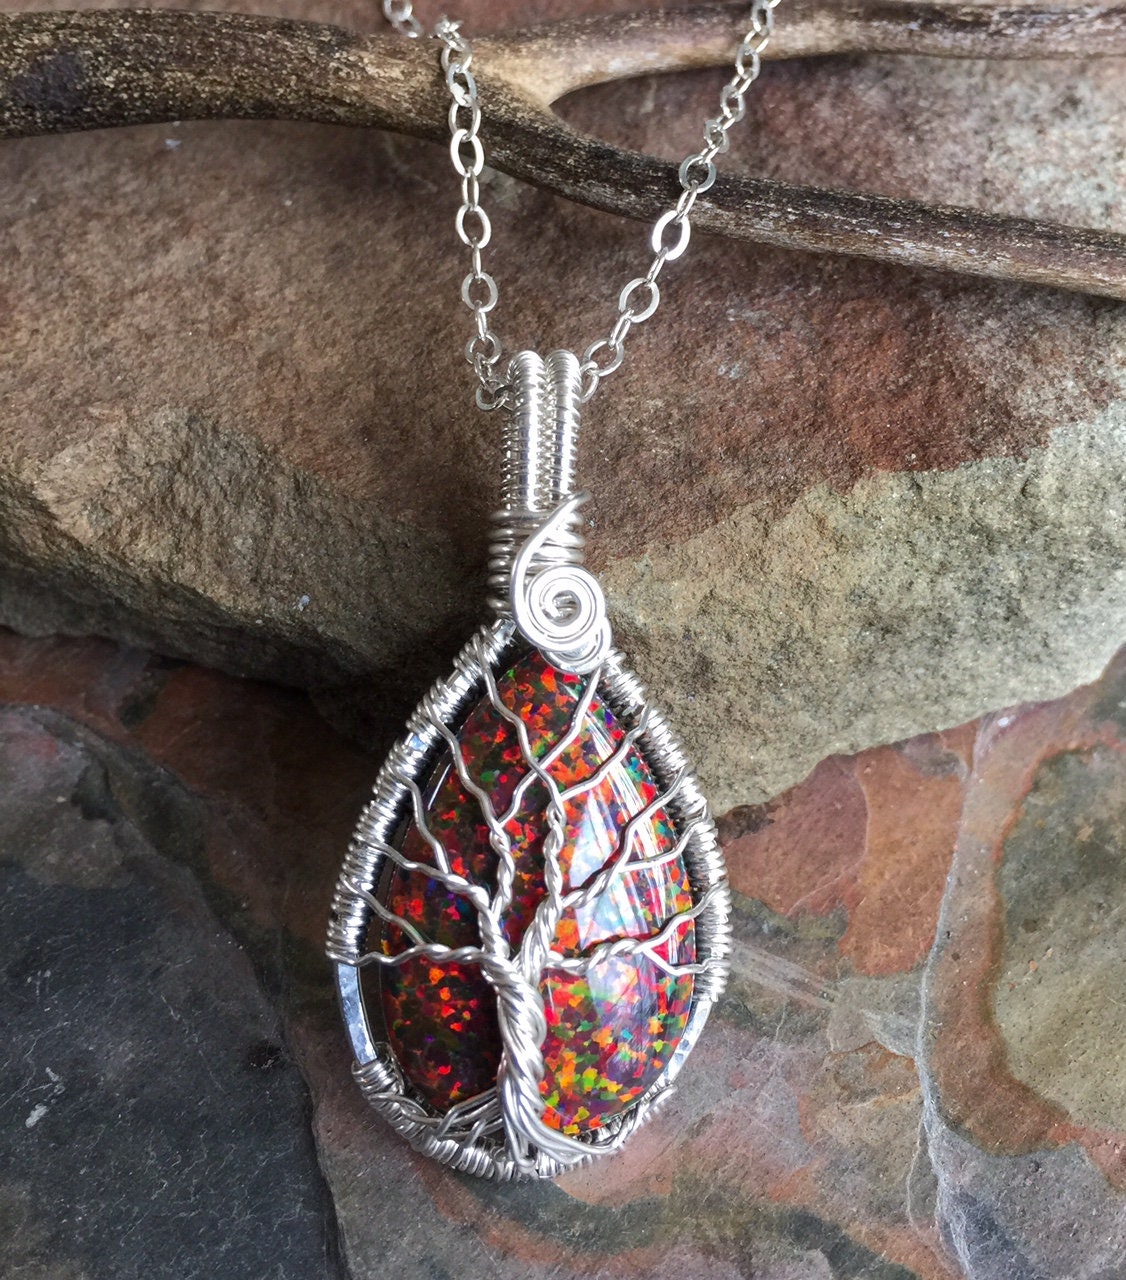 Red Opal Necklace,Opal Silver Pendant October Birthstone,Opal Tree of Life Necklace in Fine Silver Opal Gift for her,Opal Opal Necklace